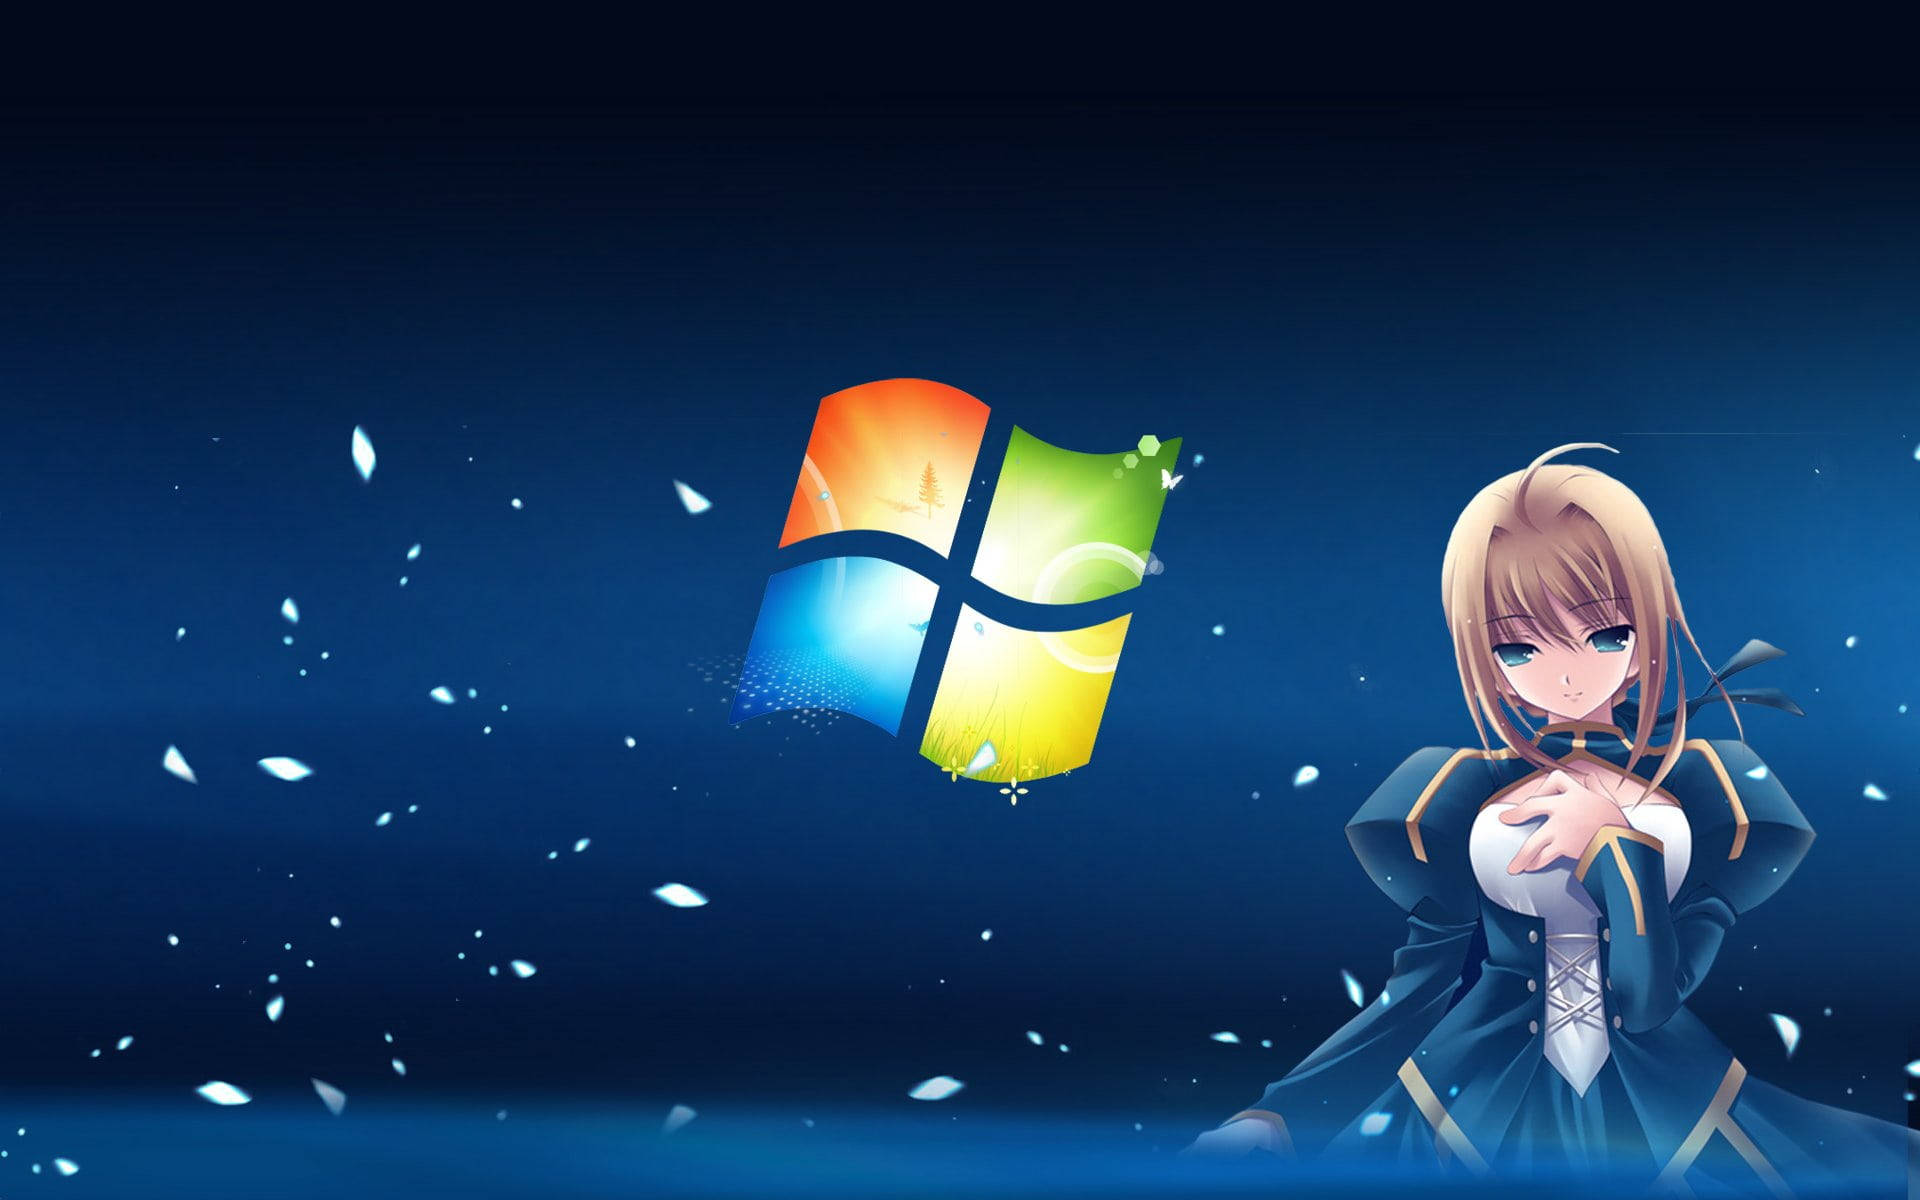 1920X1200 Windows 7 Wallpaper and Background